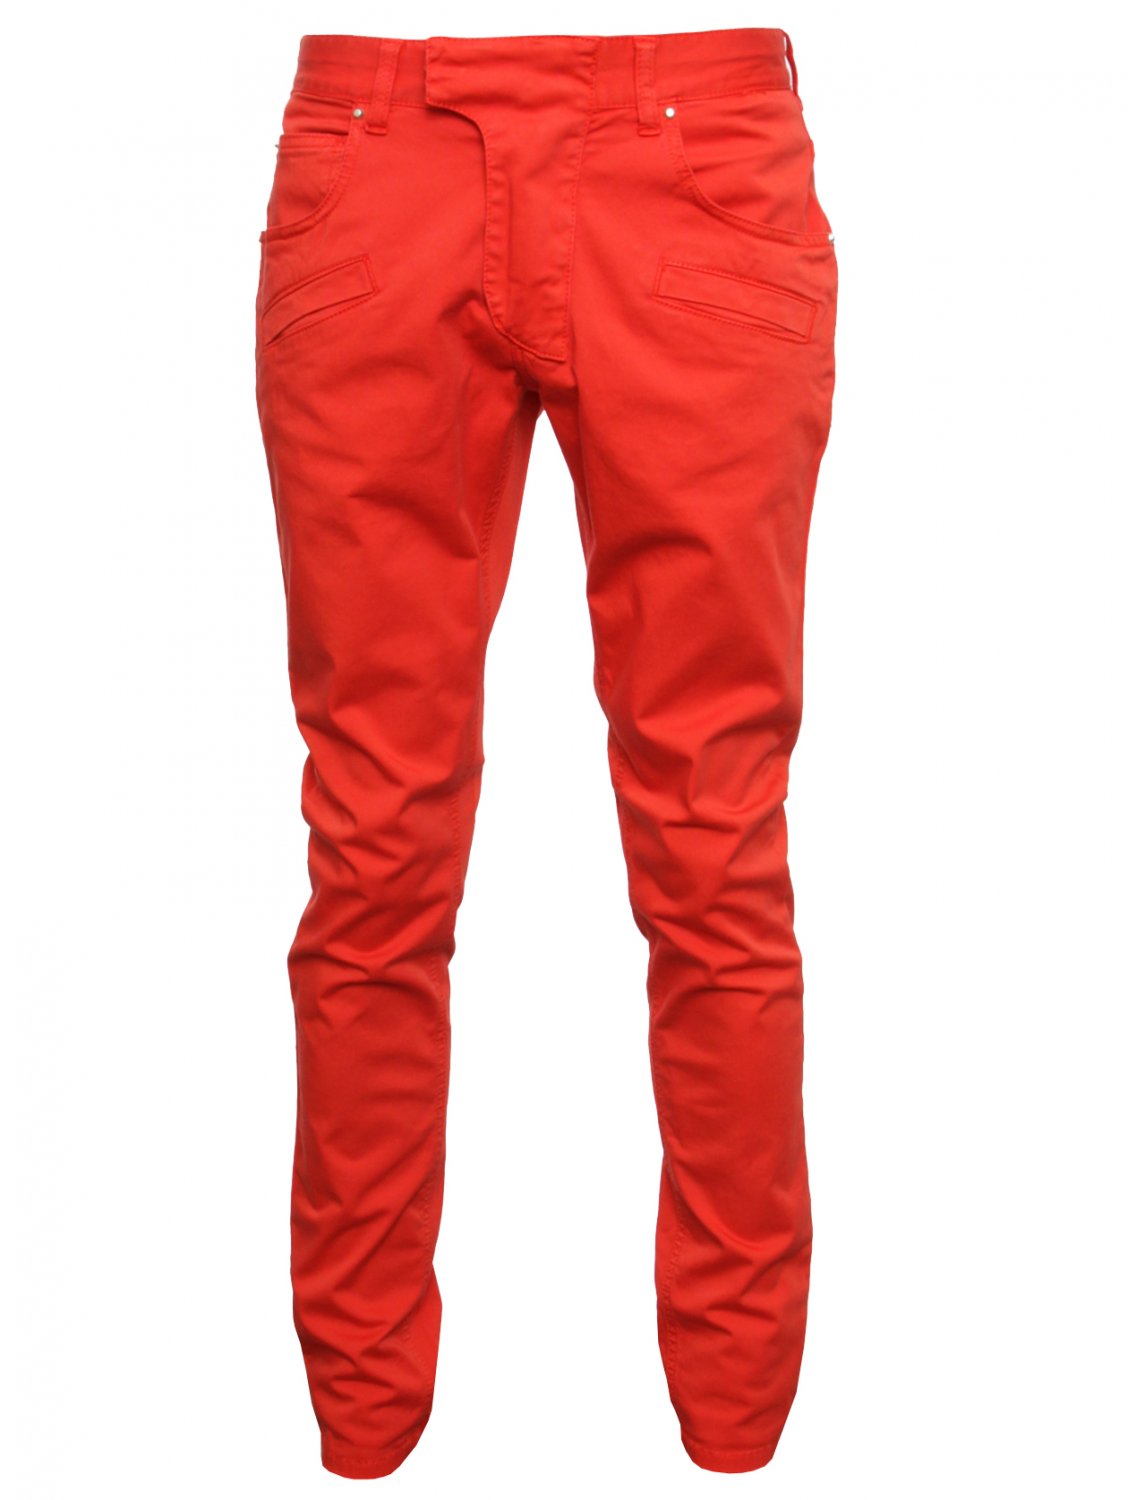 Balmain Slim Fit Cotton Jeans Bright Red in Red for Men | Lyst